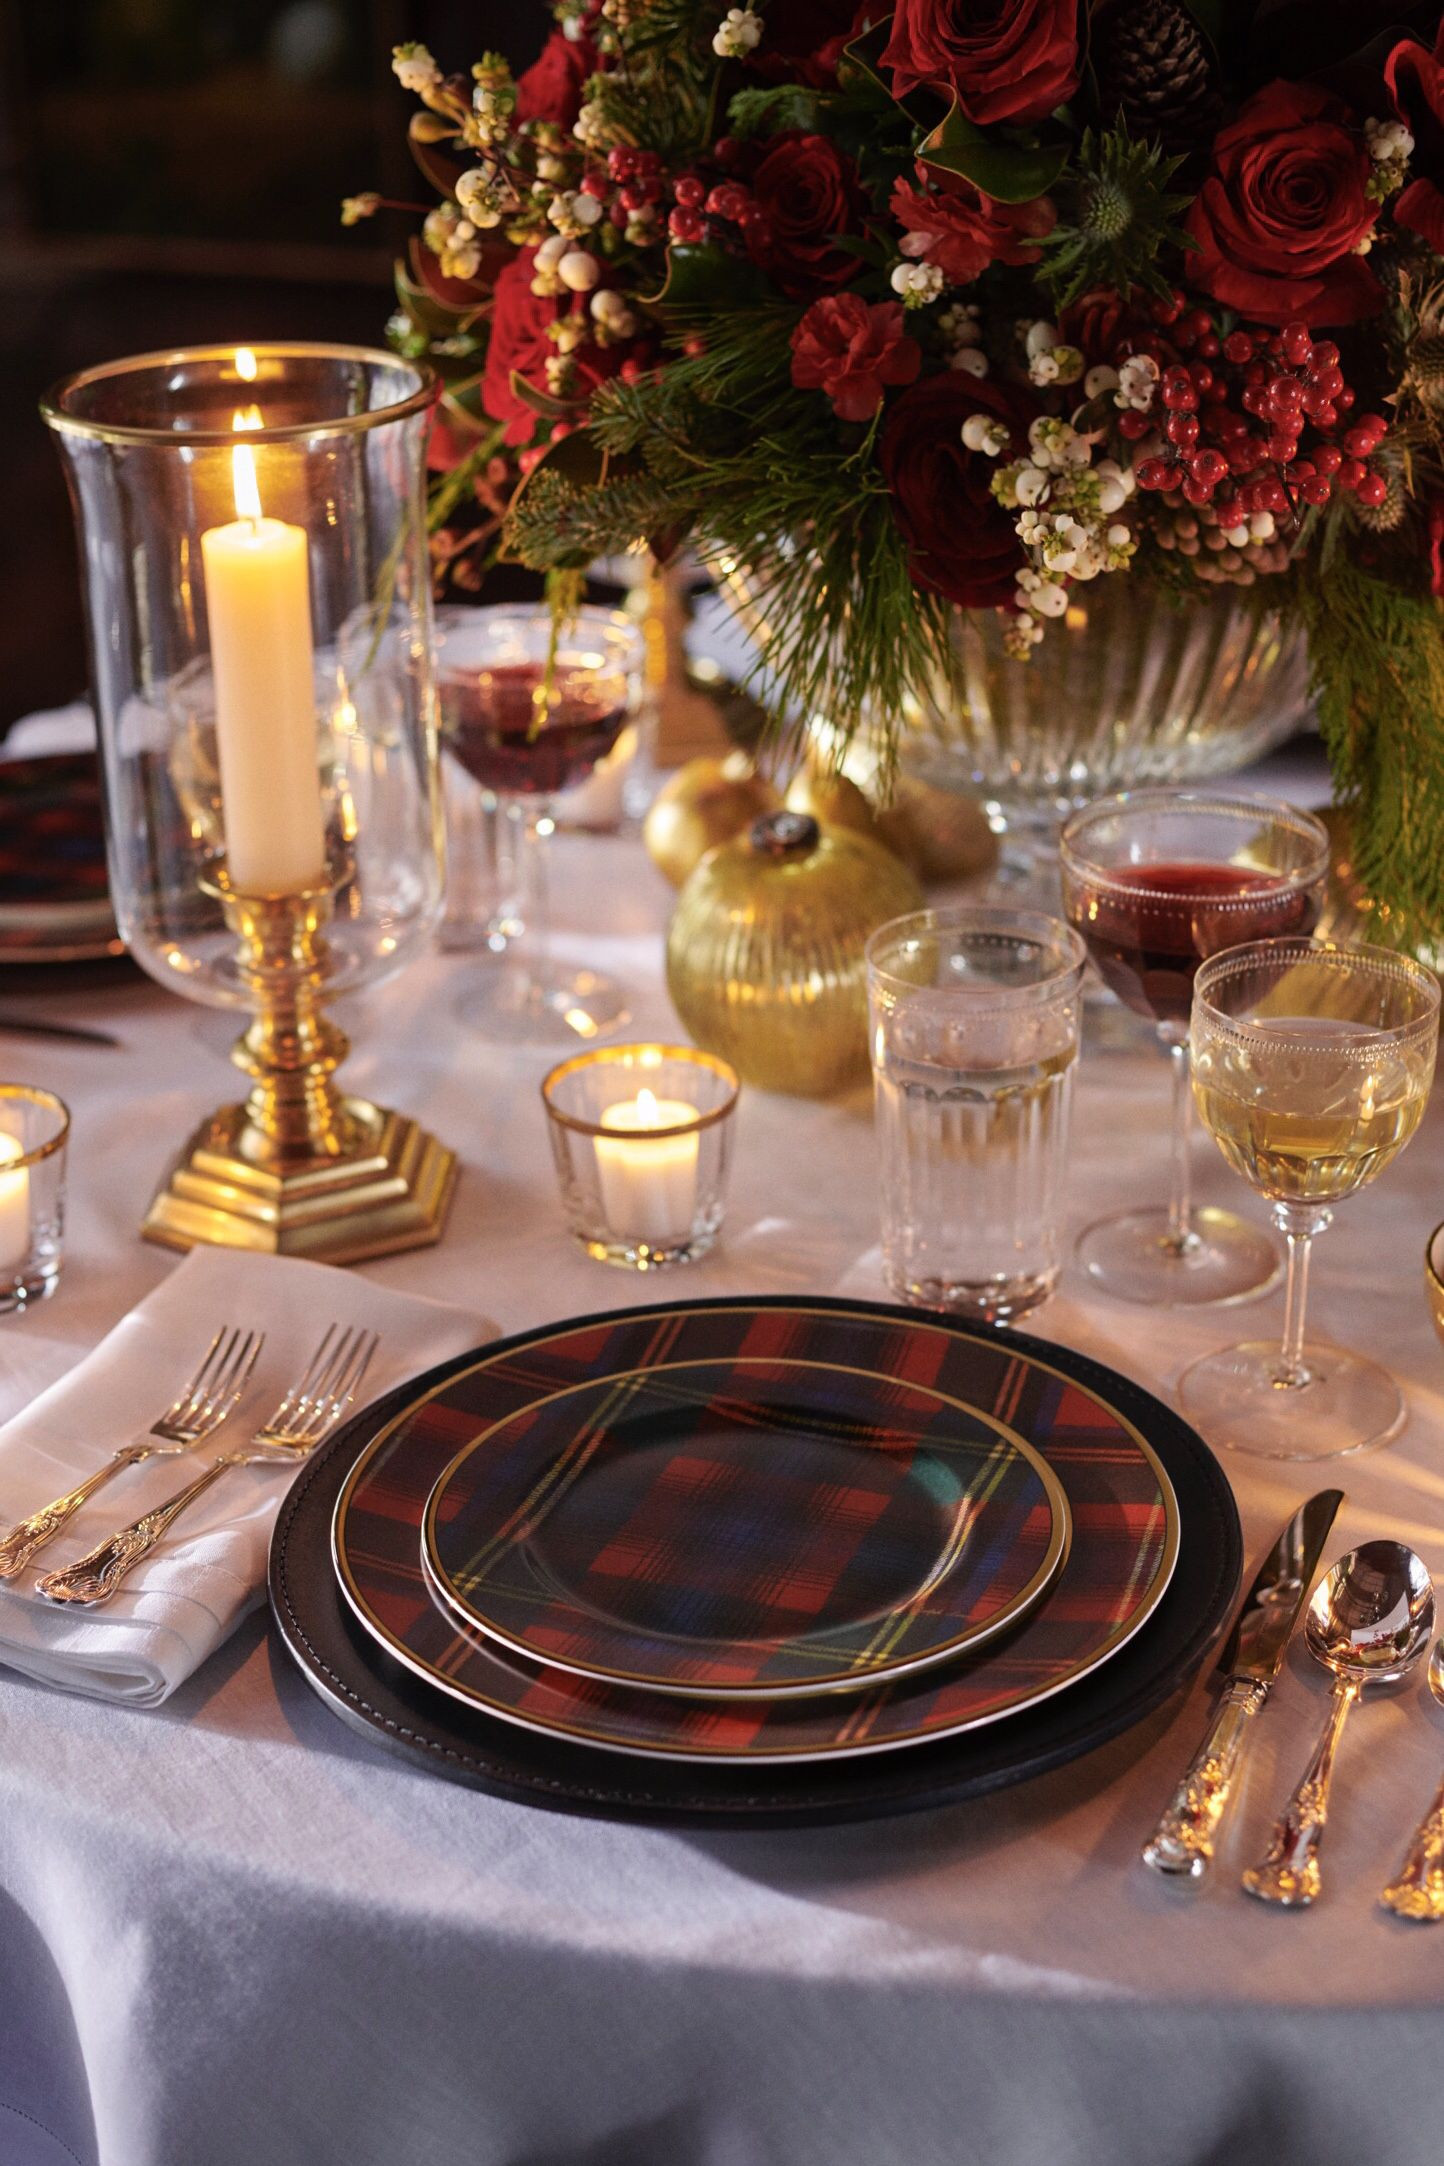 Ralphs Holiday Dinners
 No 5 50 of RL50Gifts brings to her festive table